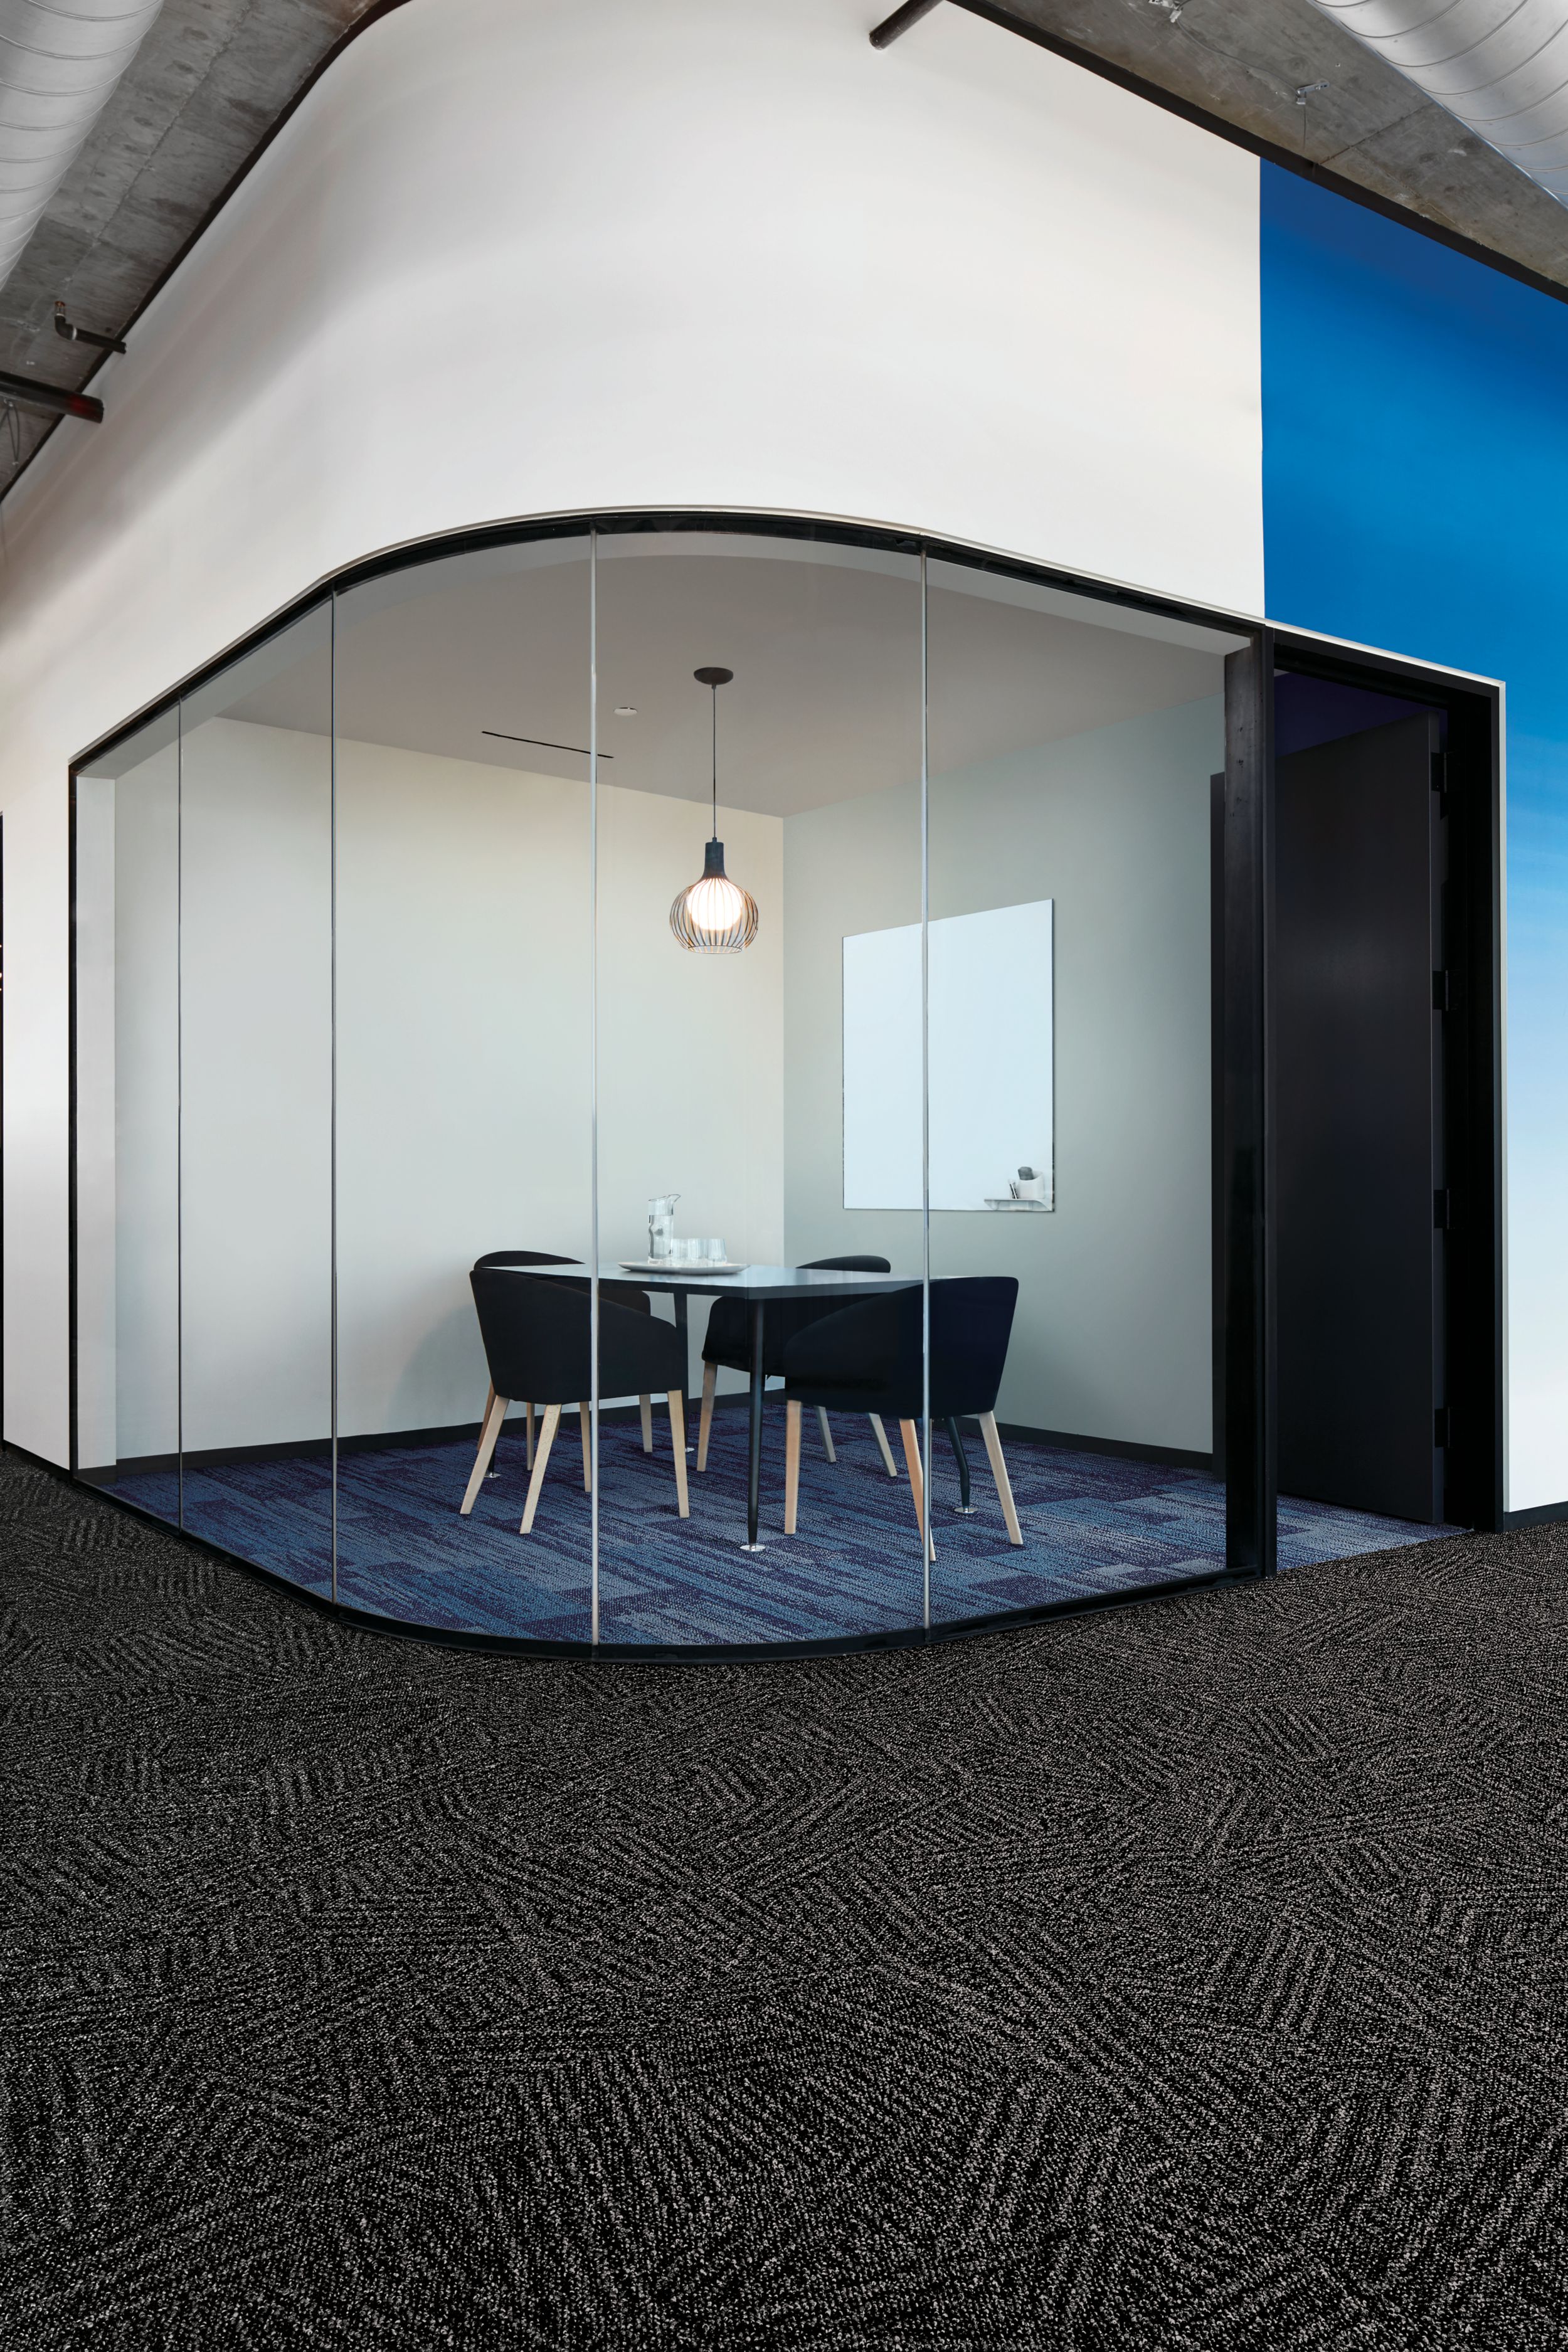 Interface AE317 plank carpet tile in enclosed meting room with Open Air 412 carpet tile in foreground numéro d’image 1